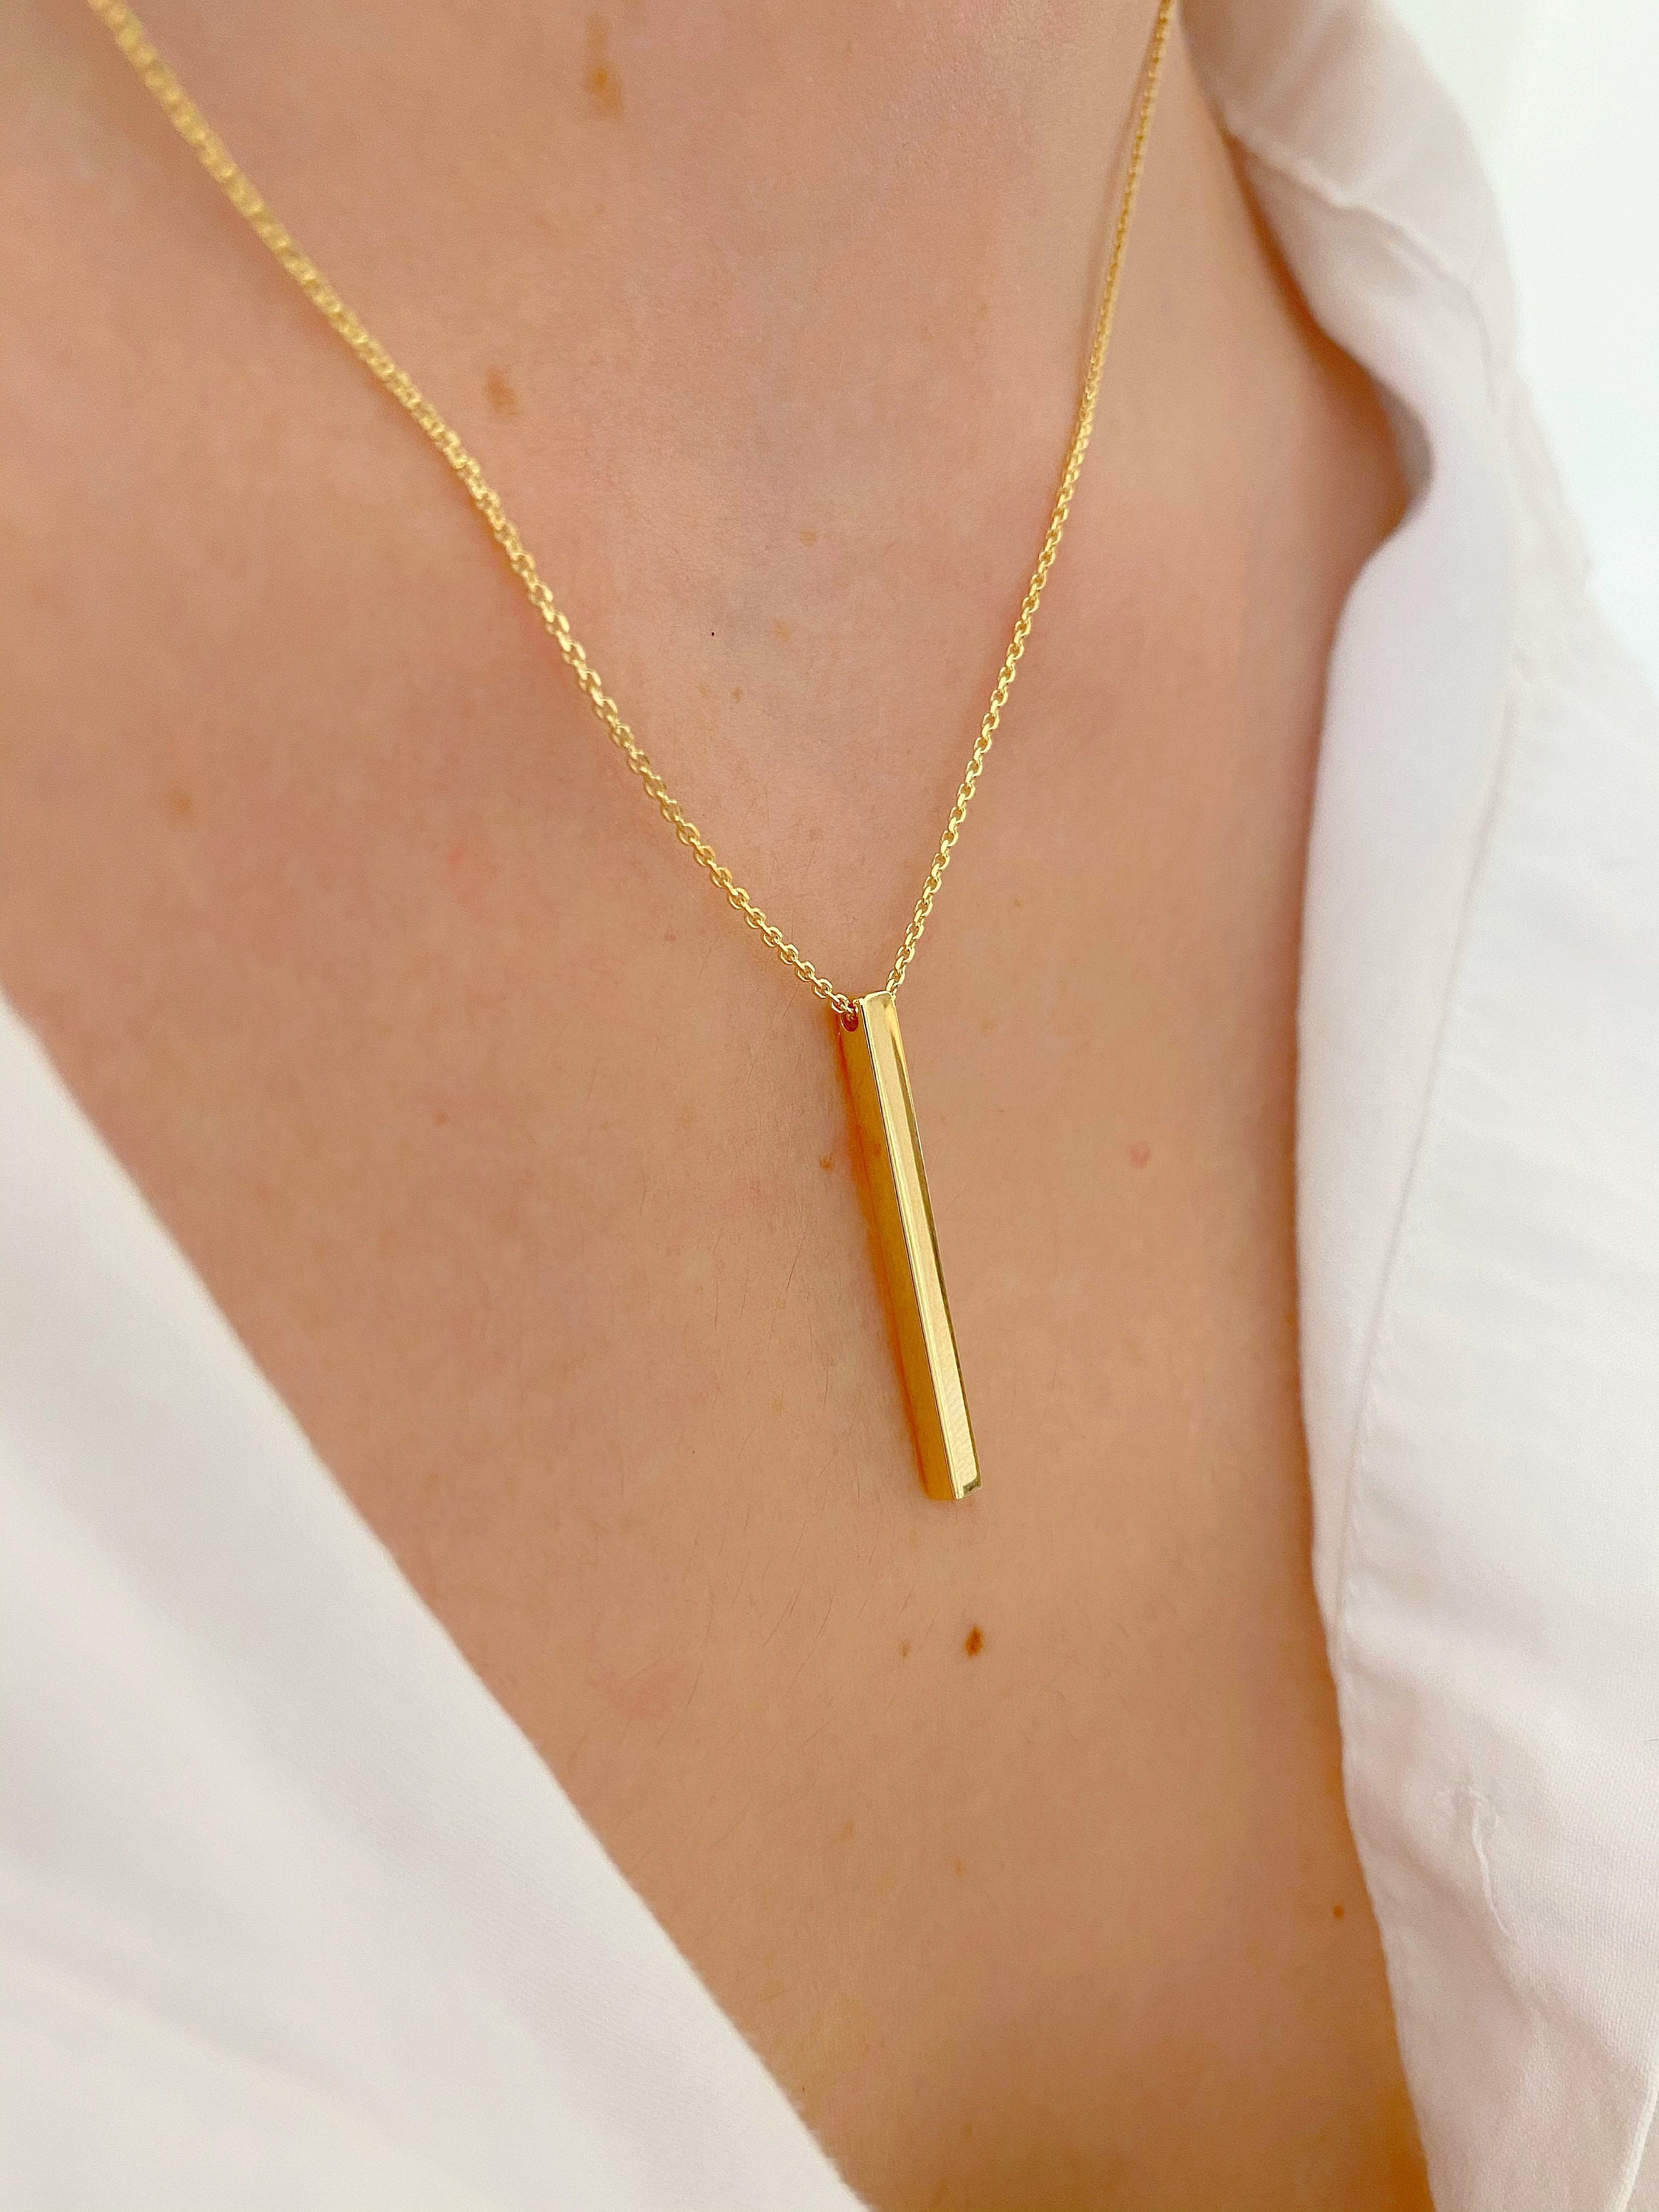 2pcs Women's Simple & Fashionable Stainless Steel Gold Chain Vertical Bar  Pendant Necklace